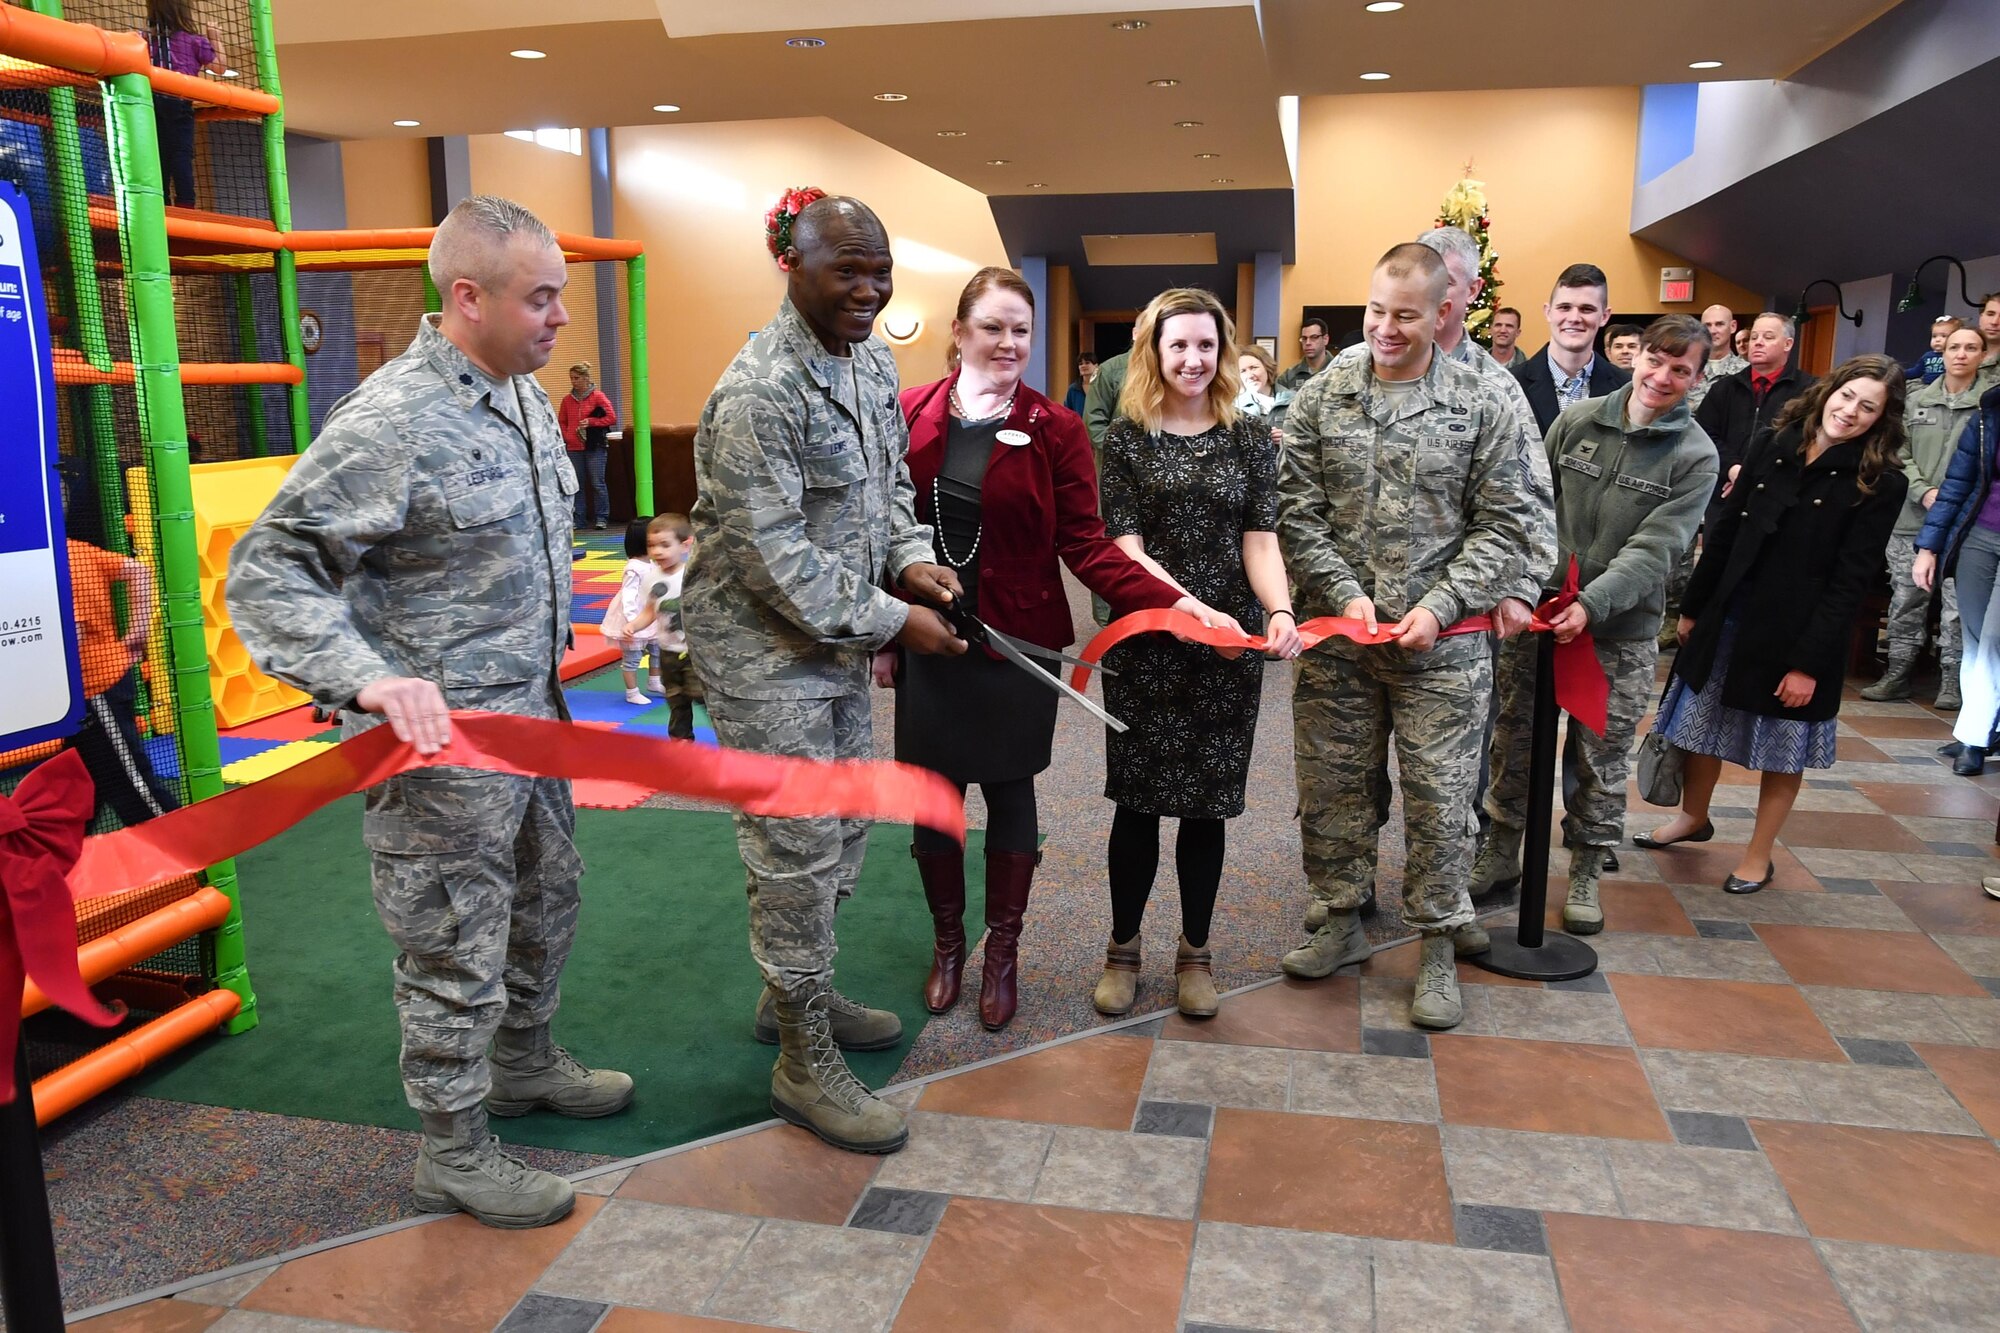 Leaders from the 319th Air Base Wing reopen the Community Activities Center on Grand Forks Air Force Base, N.D., Nov. 21, 2016. The CAC serves as a community commons, which now includes an indoor play center, game area and auditorium. (U.S. Air Force photo by Airman 1st Class Elijaih Tiggs)